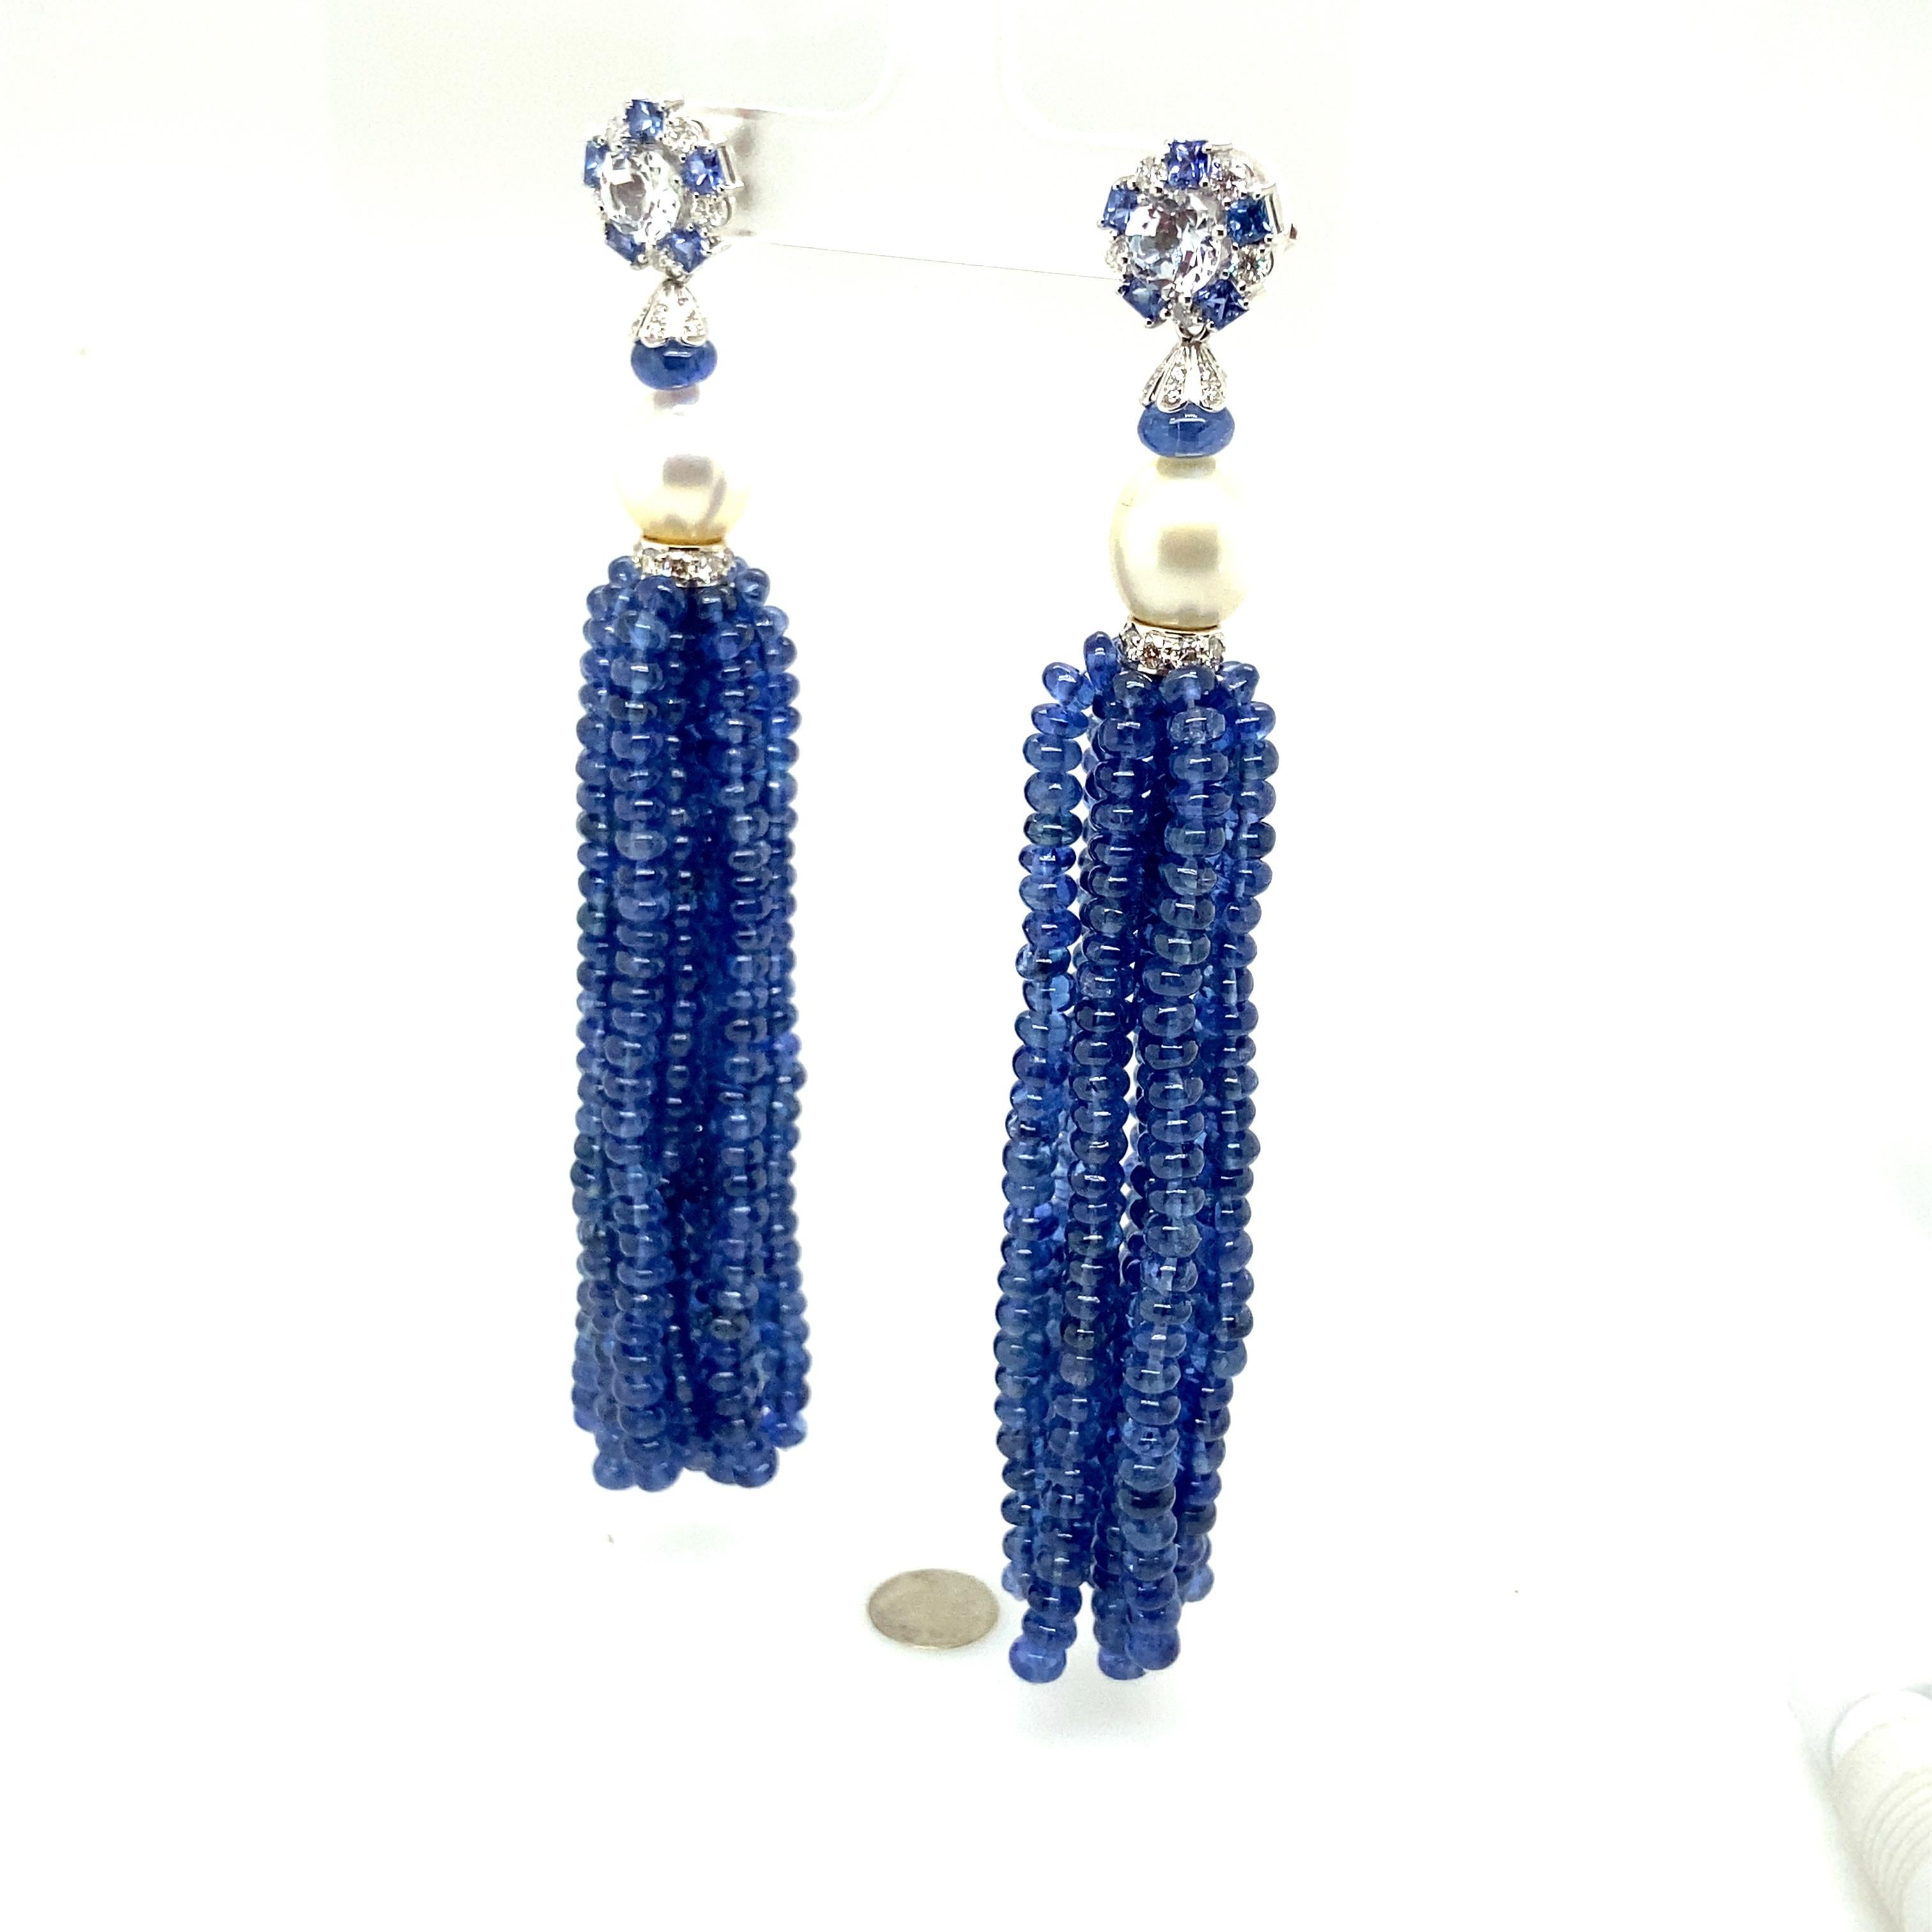 Natural Vivid Blue Sapphire Beads and Cultured Pearl Tassel Diamond Earrings:

A beautiful pair of earrings, it features natural vivid blue sapphire beads weighing 228 carat assembled as tassels, with a pair of luscious cultured pearls weighing